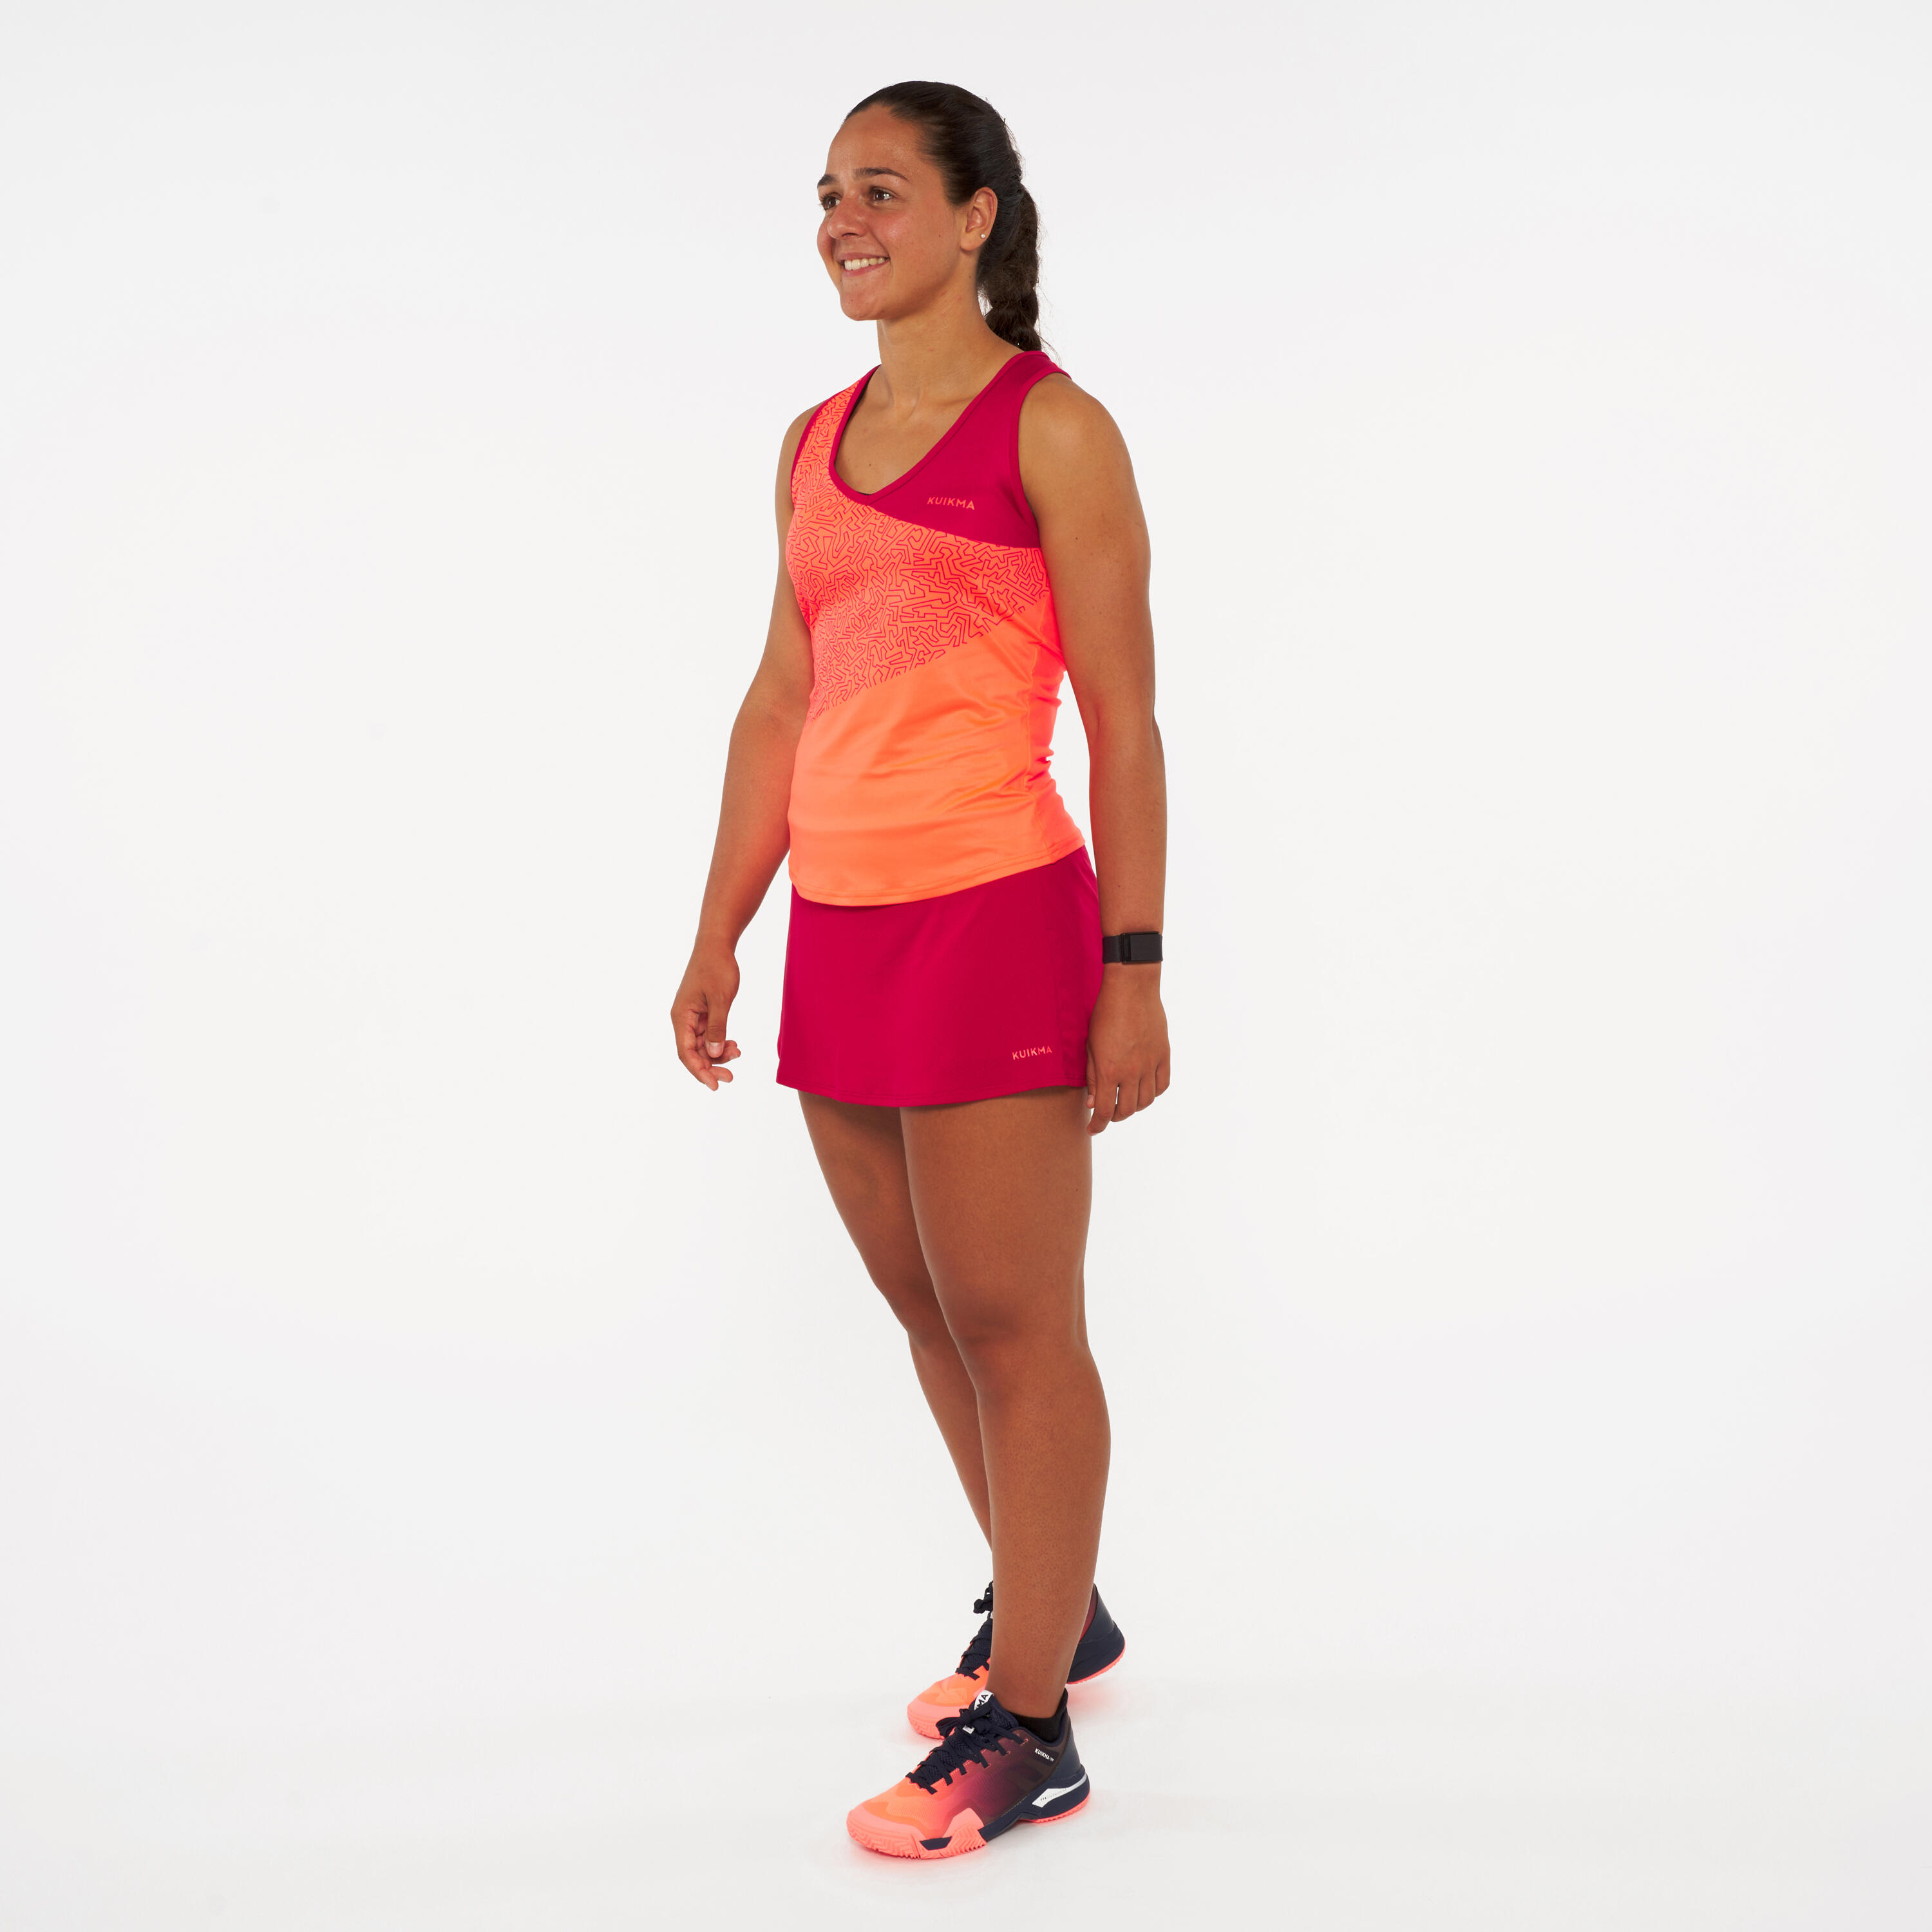 Women's Technical Breathable Padel Tank Top Dry - Red/Orange 7/7